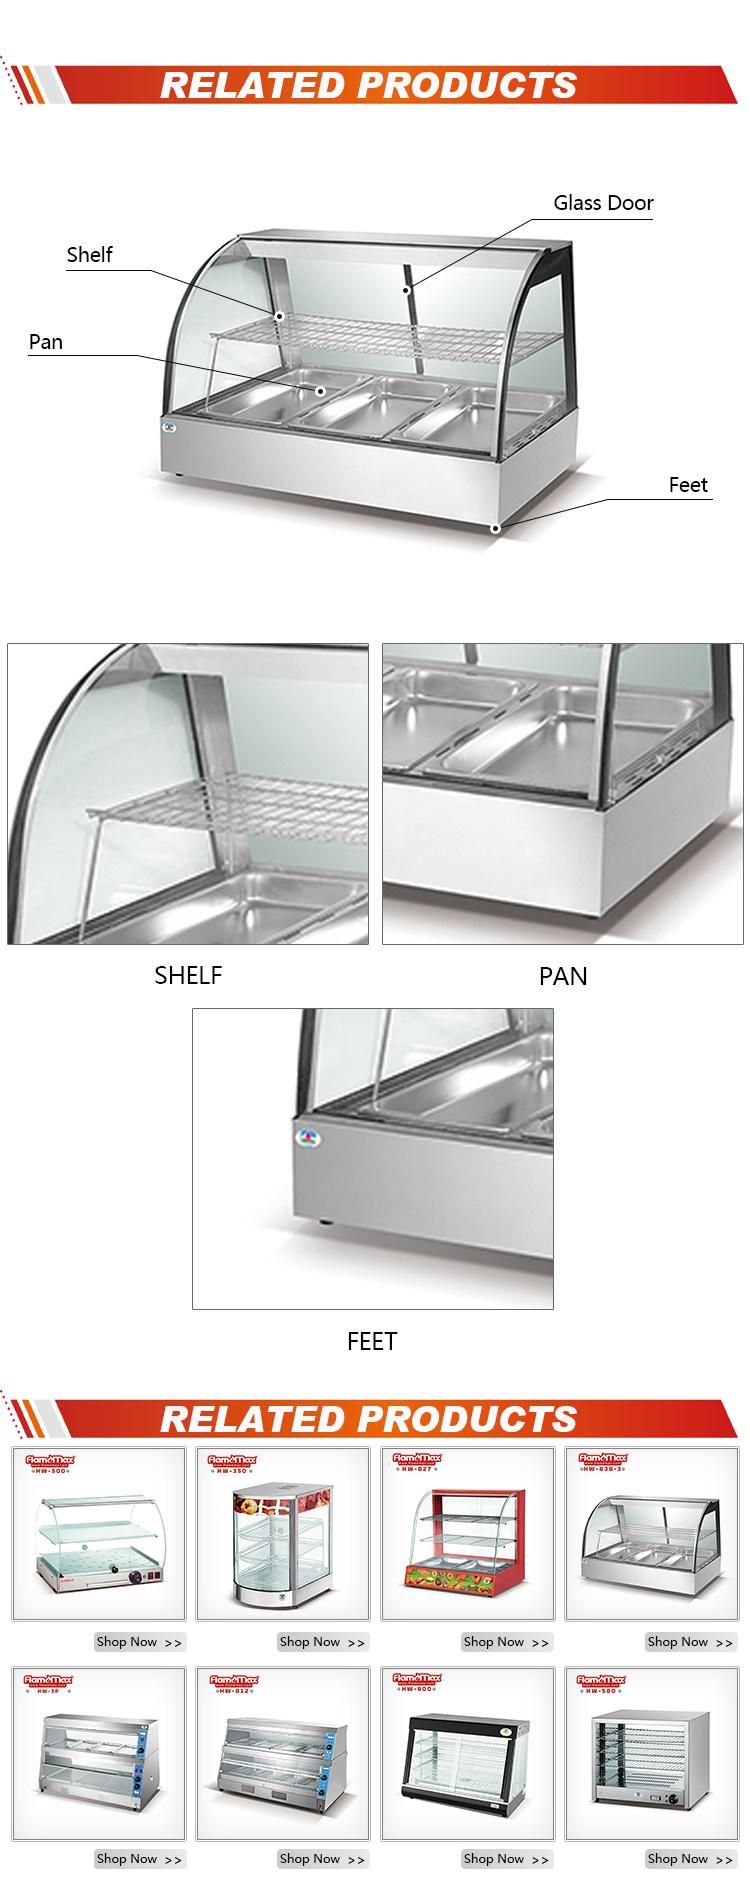 Hw-838 Food Warmer Stainless Steel Curved Glass Heater Food Showcase Food Display Warmer with 2 Pans